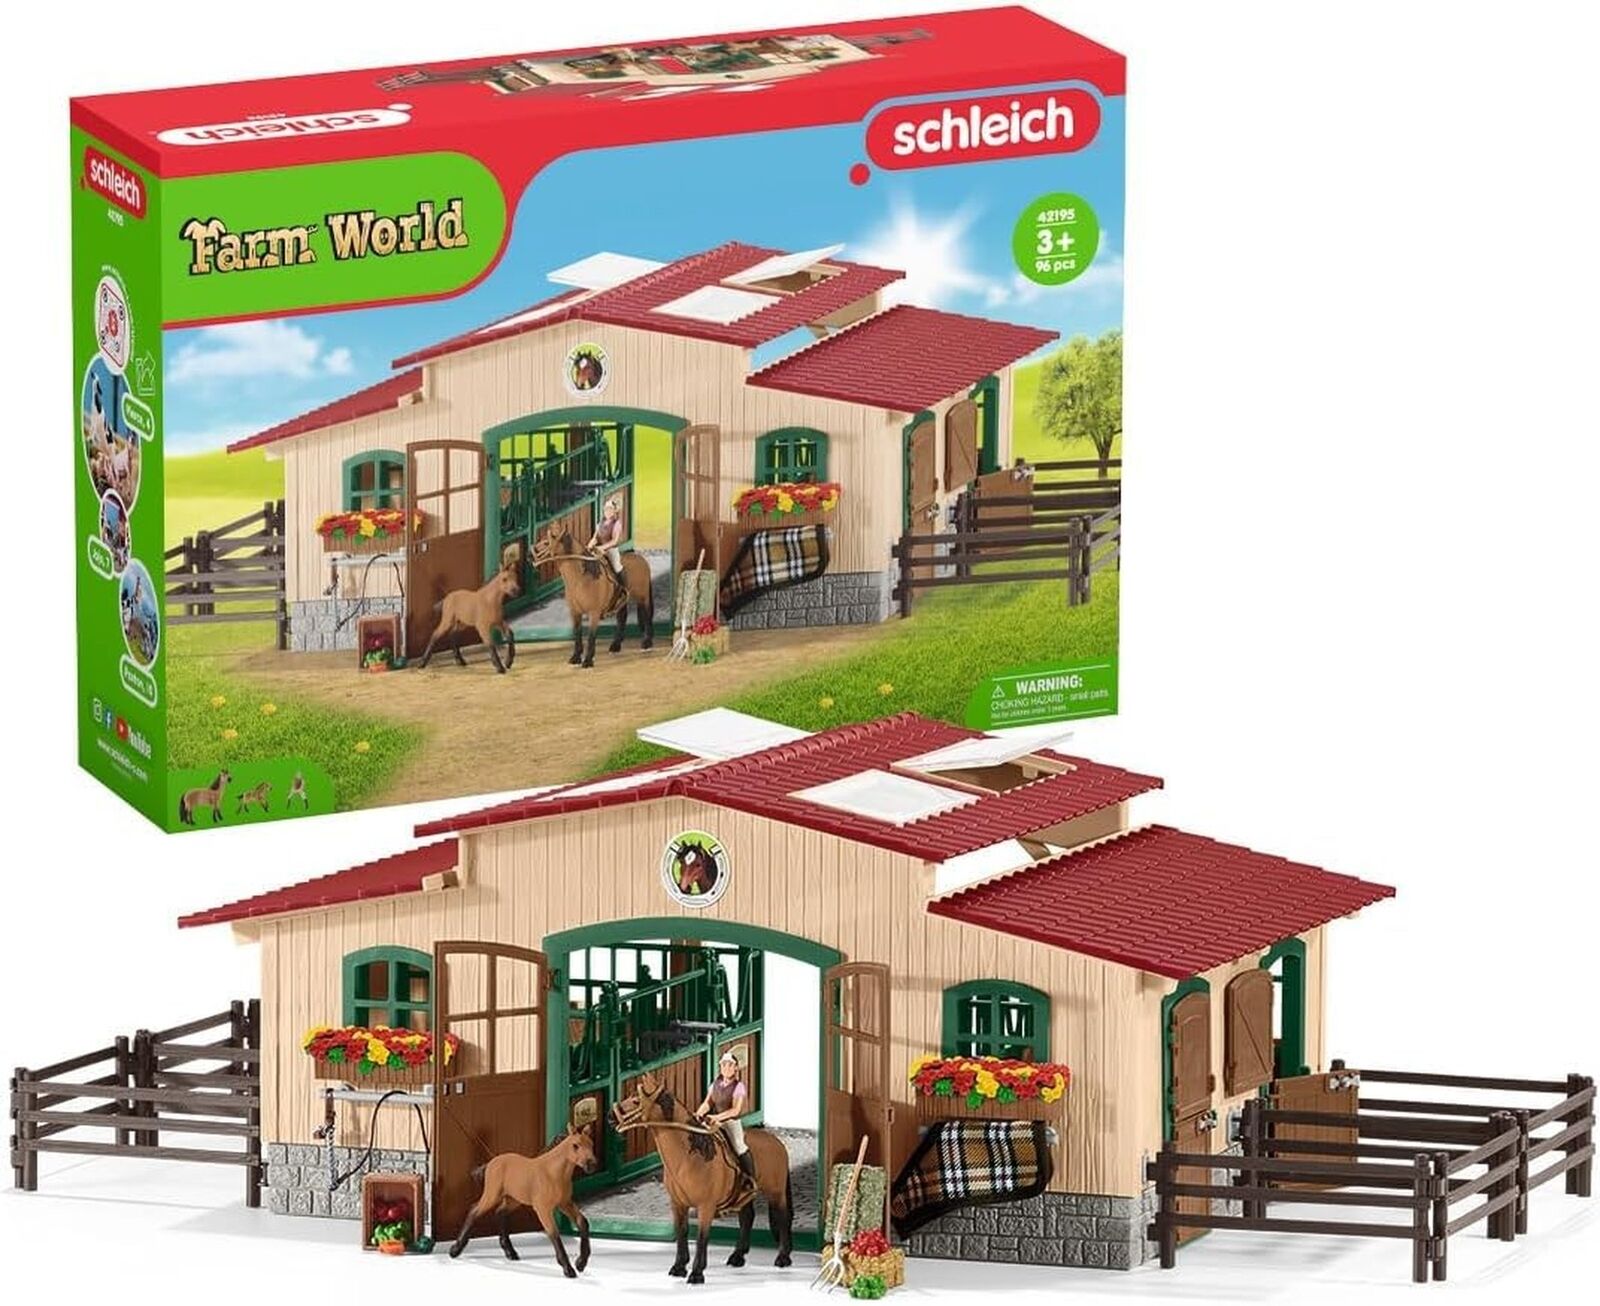 Schleich Horse Barn and Stable Playset - Award-Winning Riding Center 96 Piece...